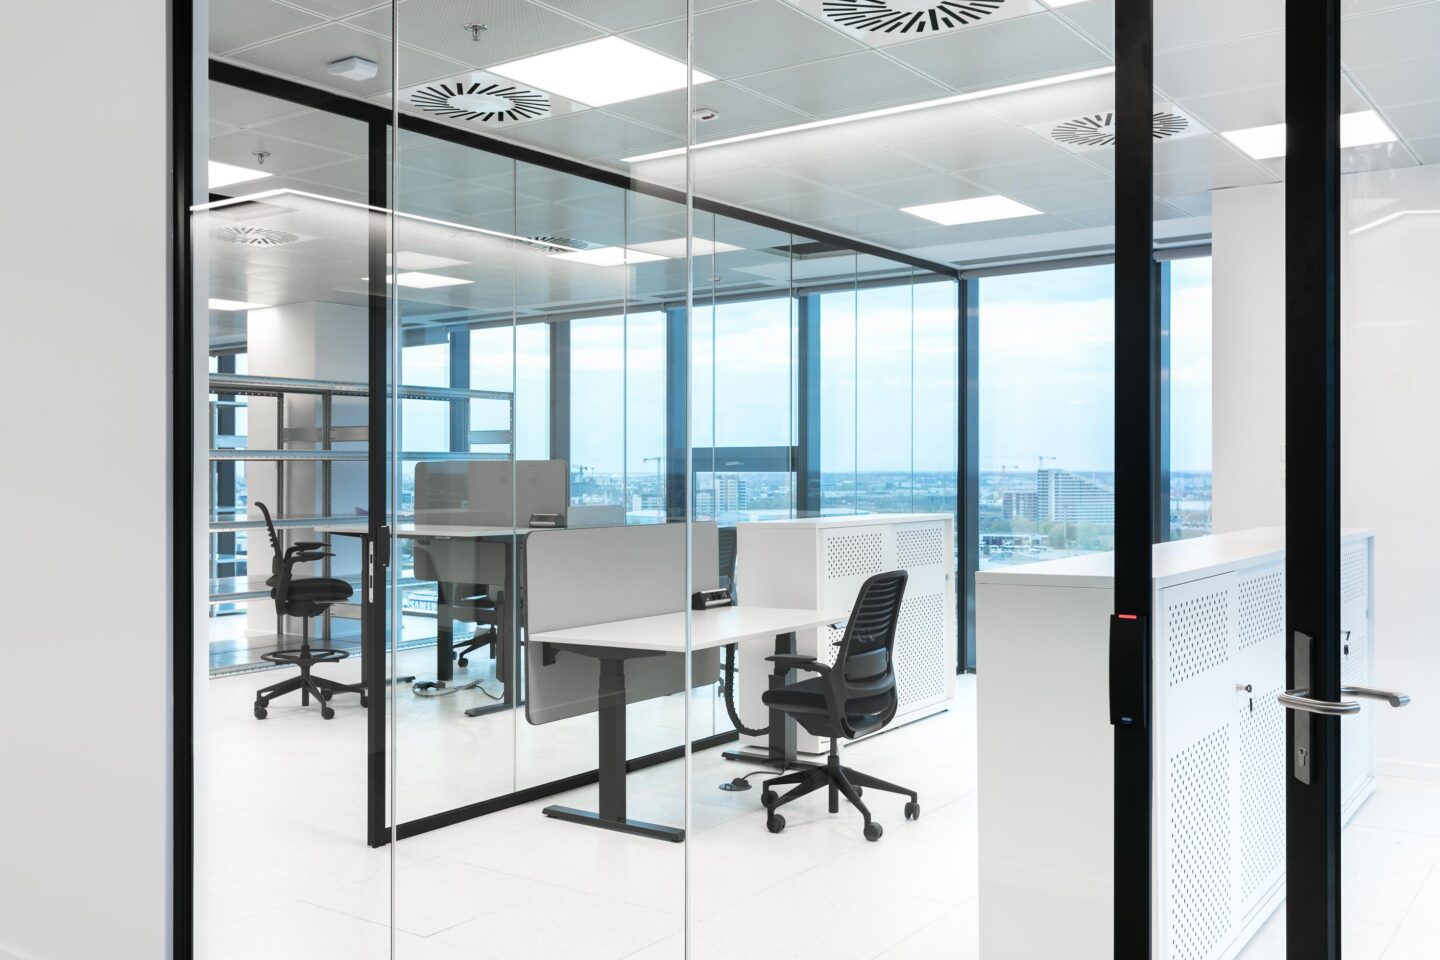 feco-feederle│partition wall systems│IT Services Company, Bucharest